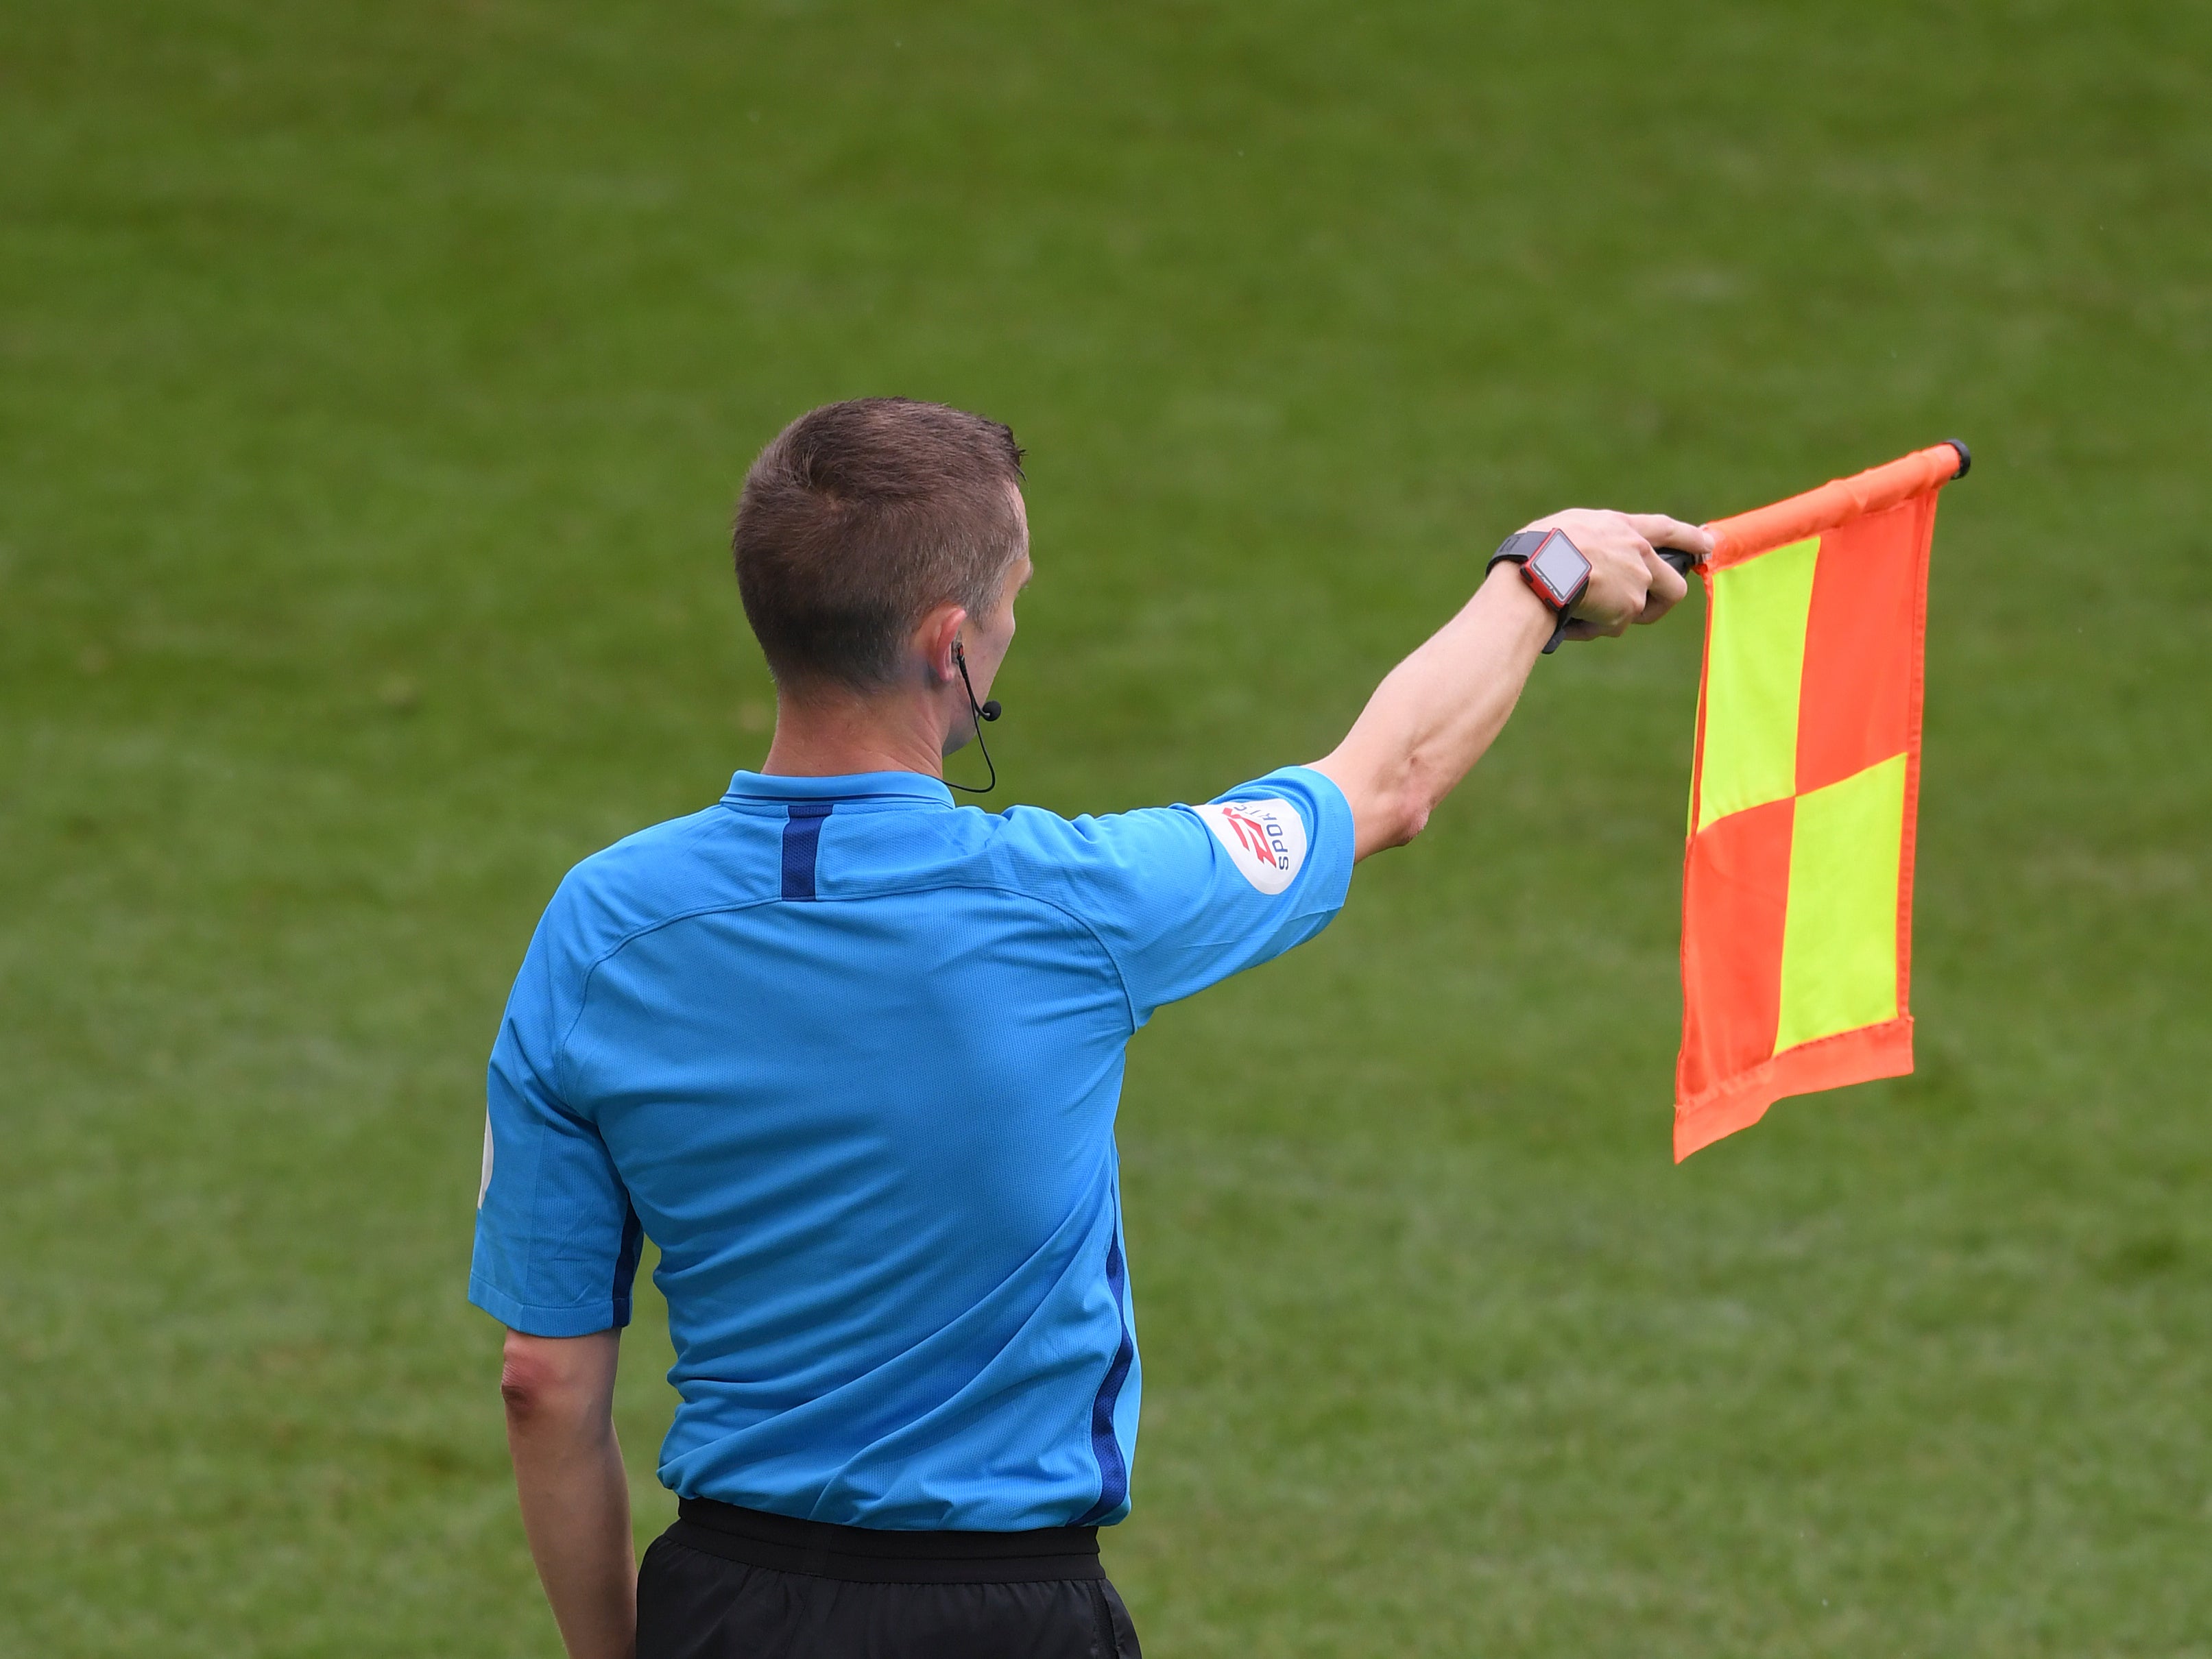 An assistant referee flags for offside